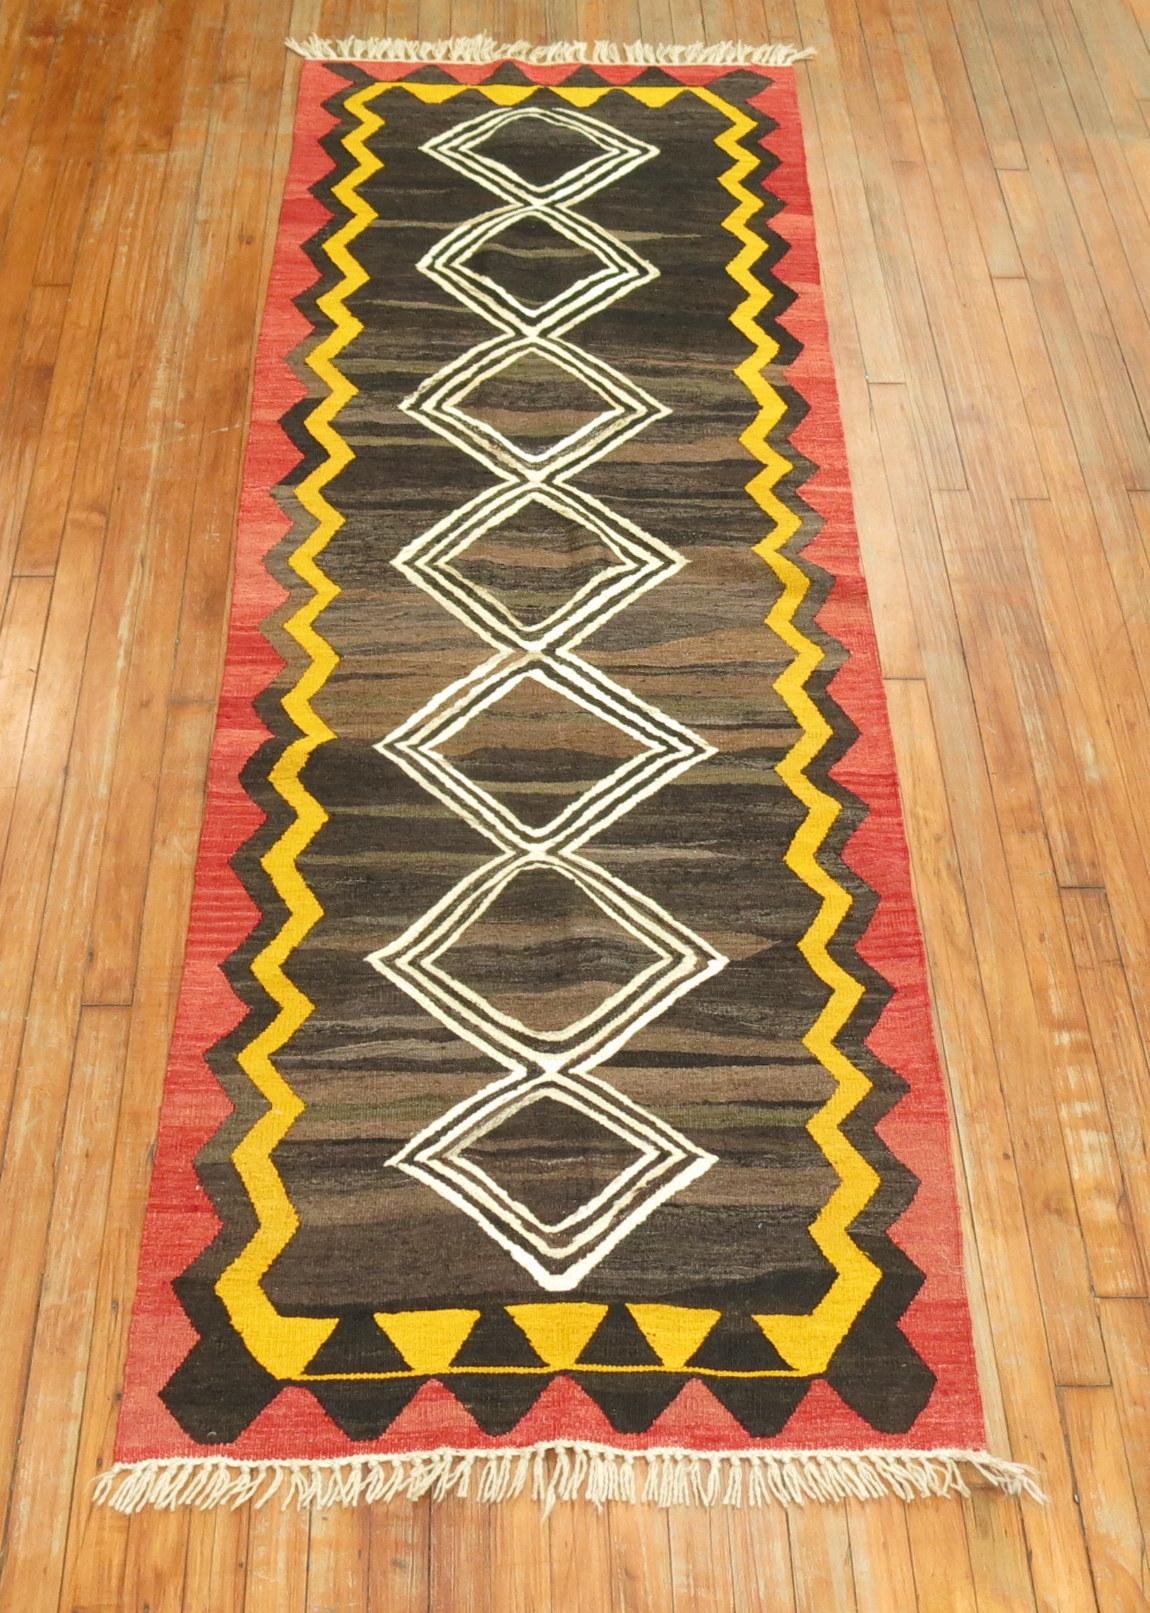 A one of a kind Central Asian Kilim runner with abstract geometric elements.